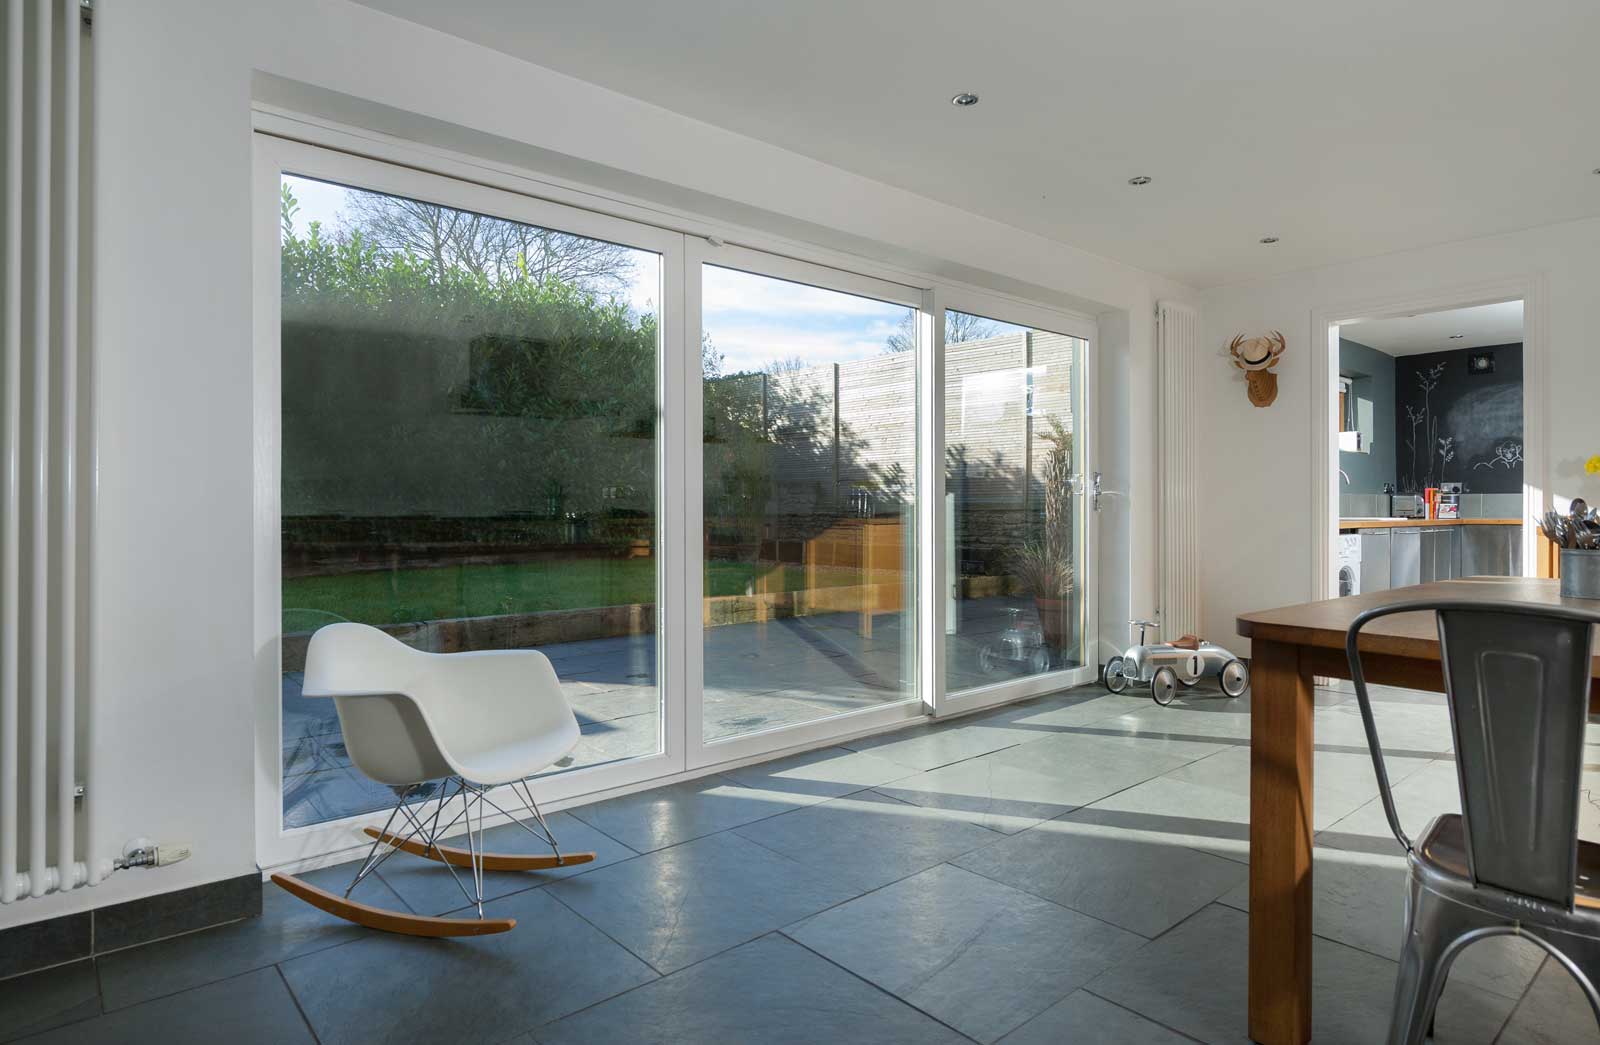 <strong>How Insulating are Patio Doors? </strong>